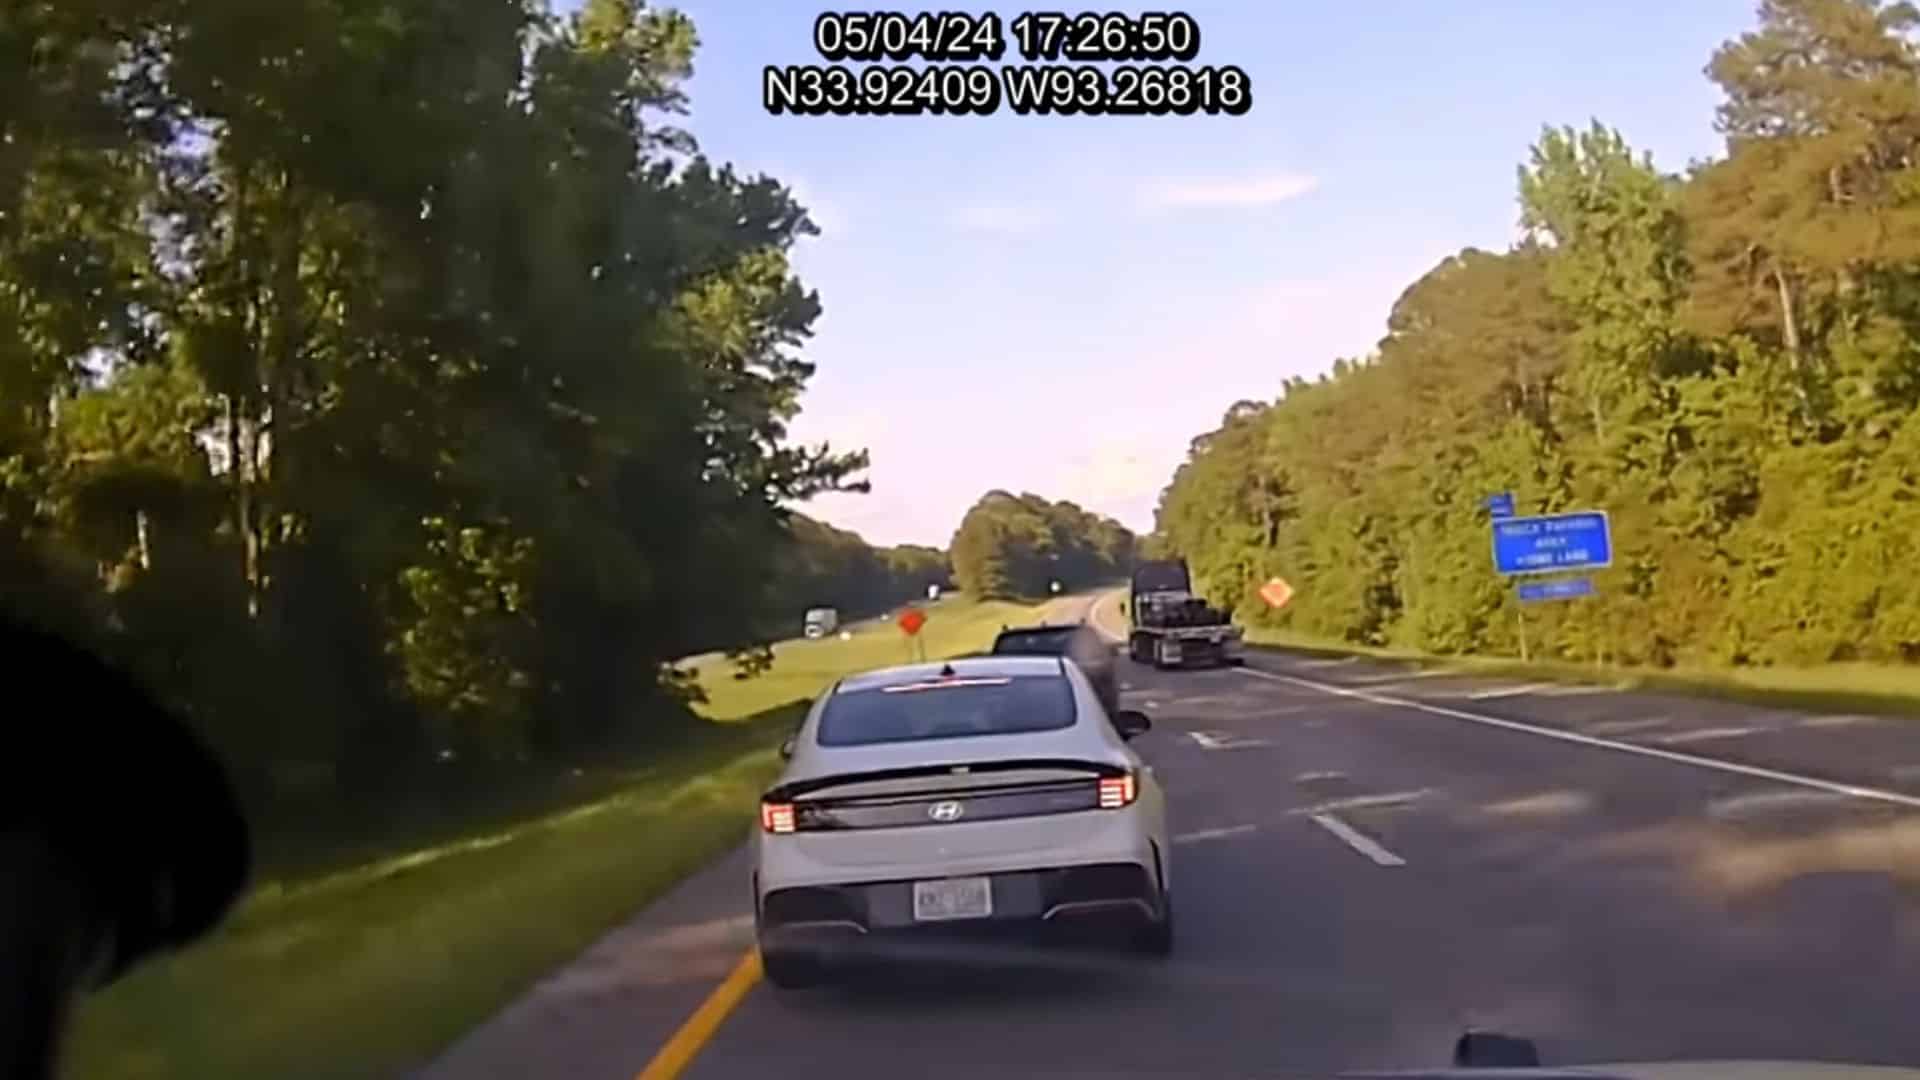 Spike Strips End Police Chase In An Unusual Way